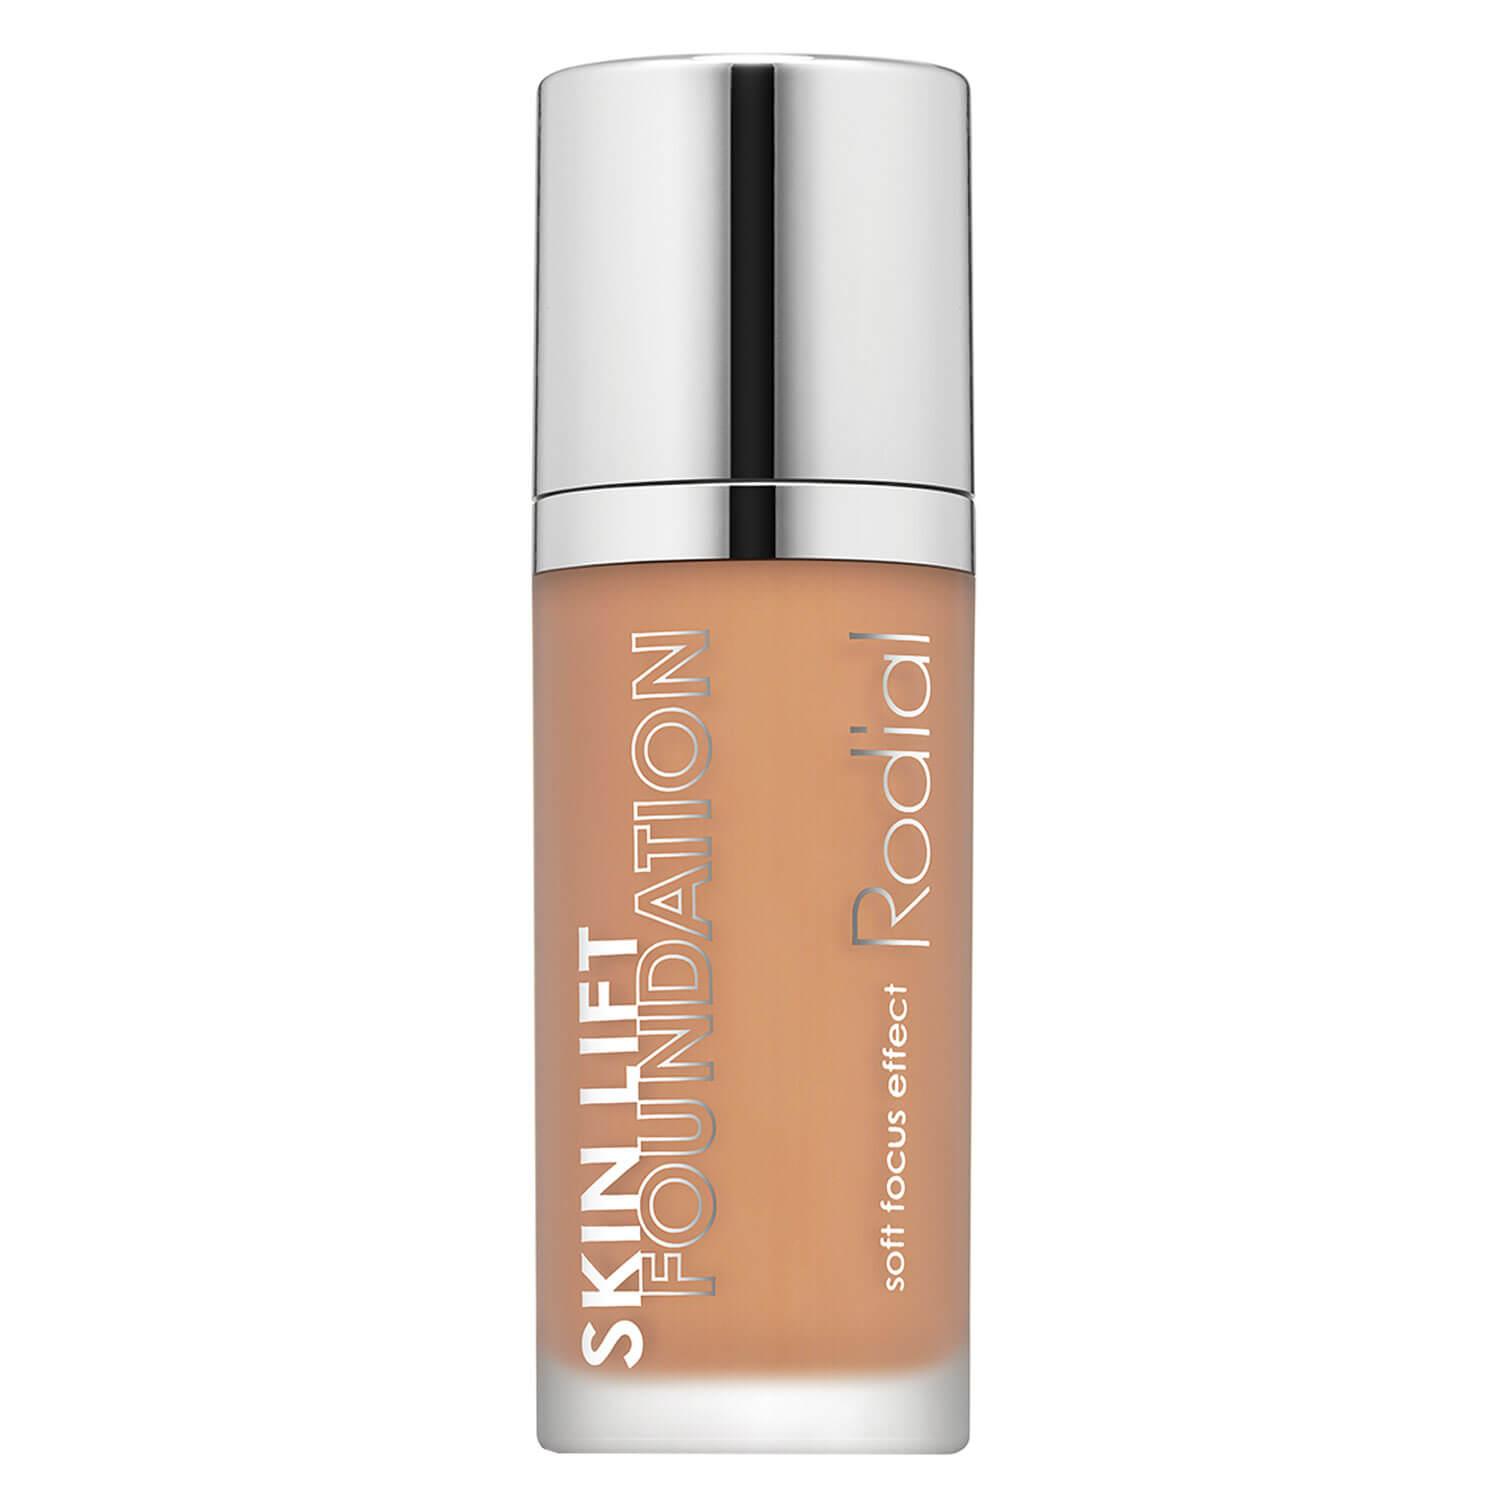 Rodial Make-up - Skin Lift Foundation Cappuccino